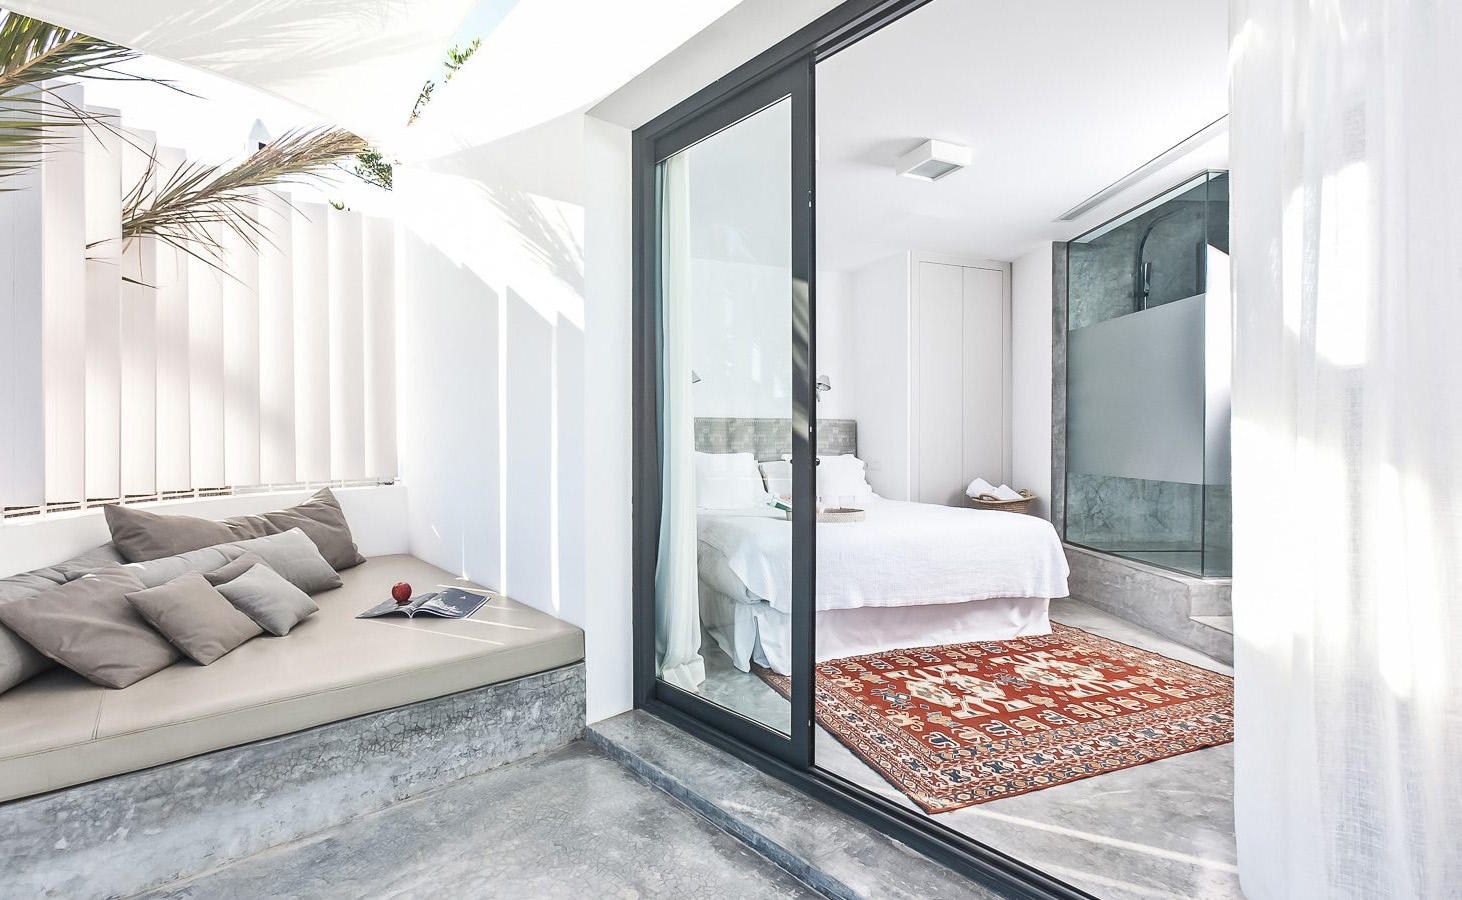 <p>Lovelydays Luxury Rentals introduce you pictures of a charming house in the heart of Spain</p>